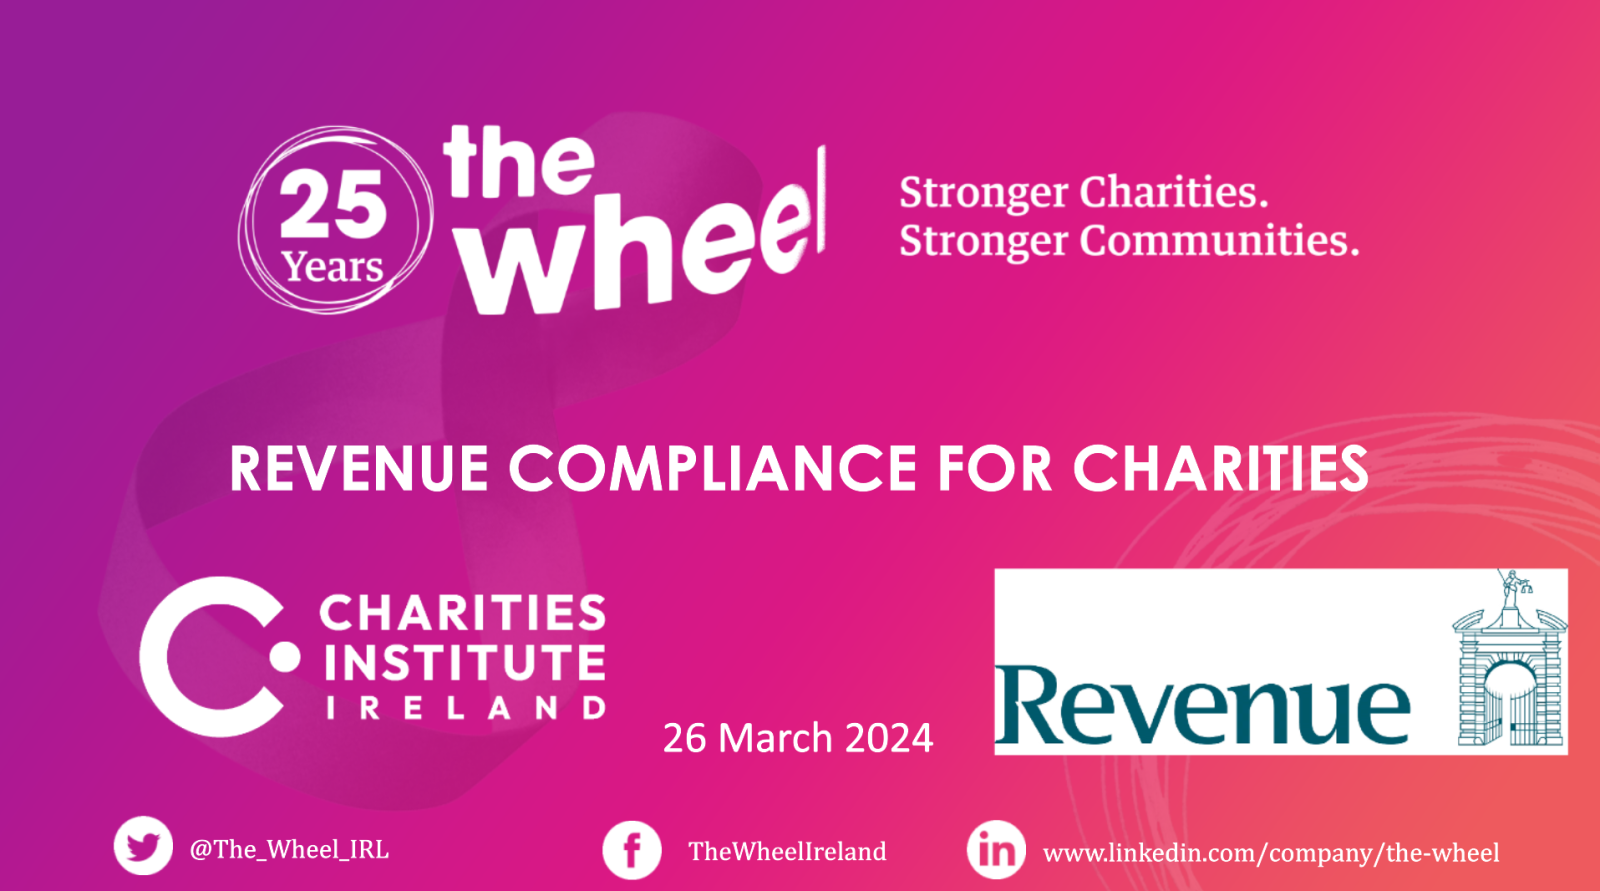 Revenue Compliance for Charities 26 March 2024